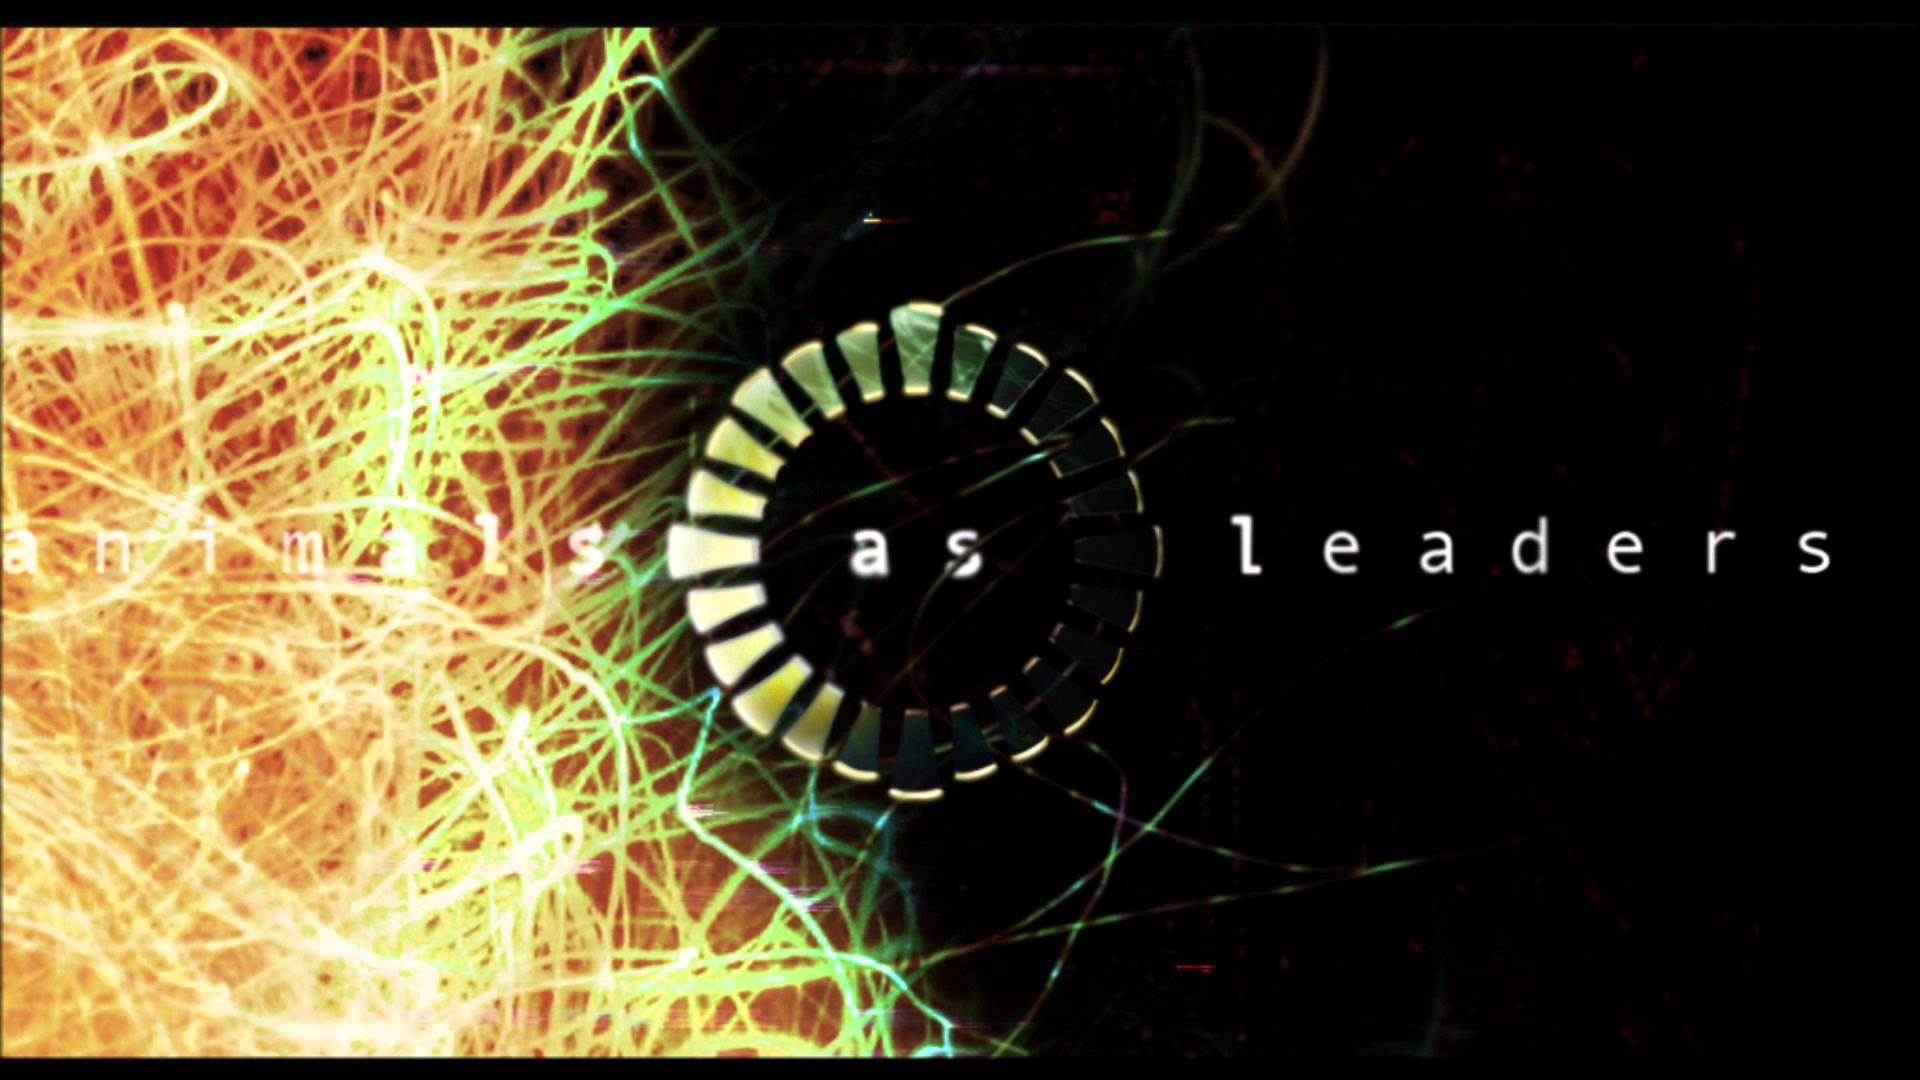 Animals As Leaders Wallpaper, FHDQ Photo